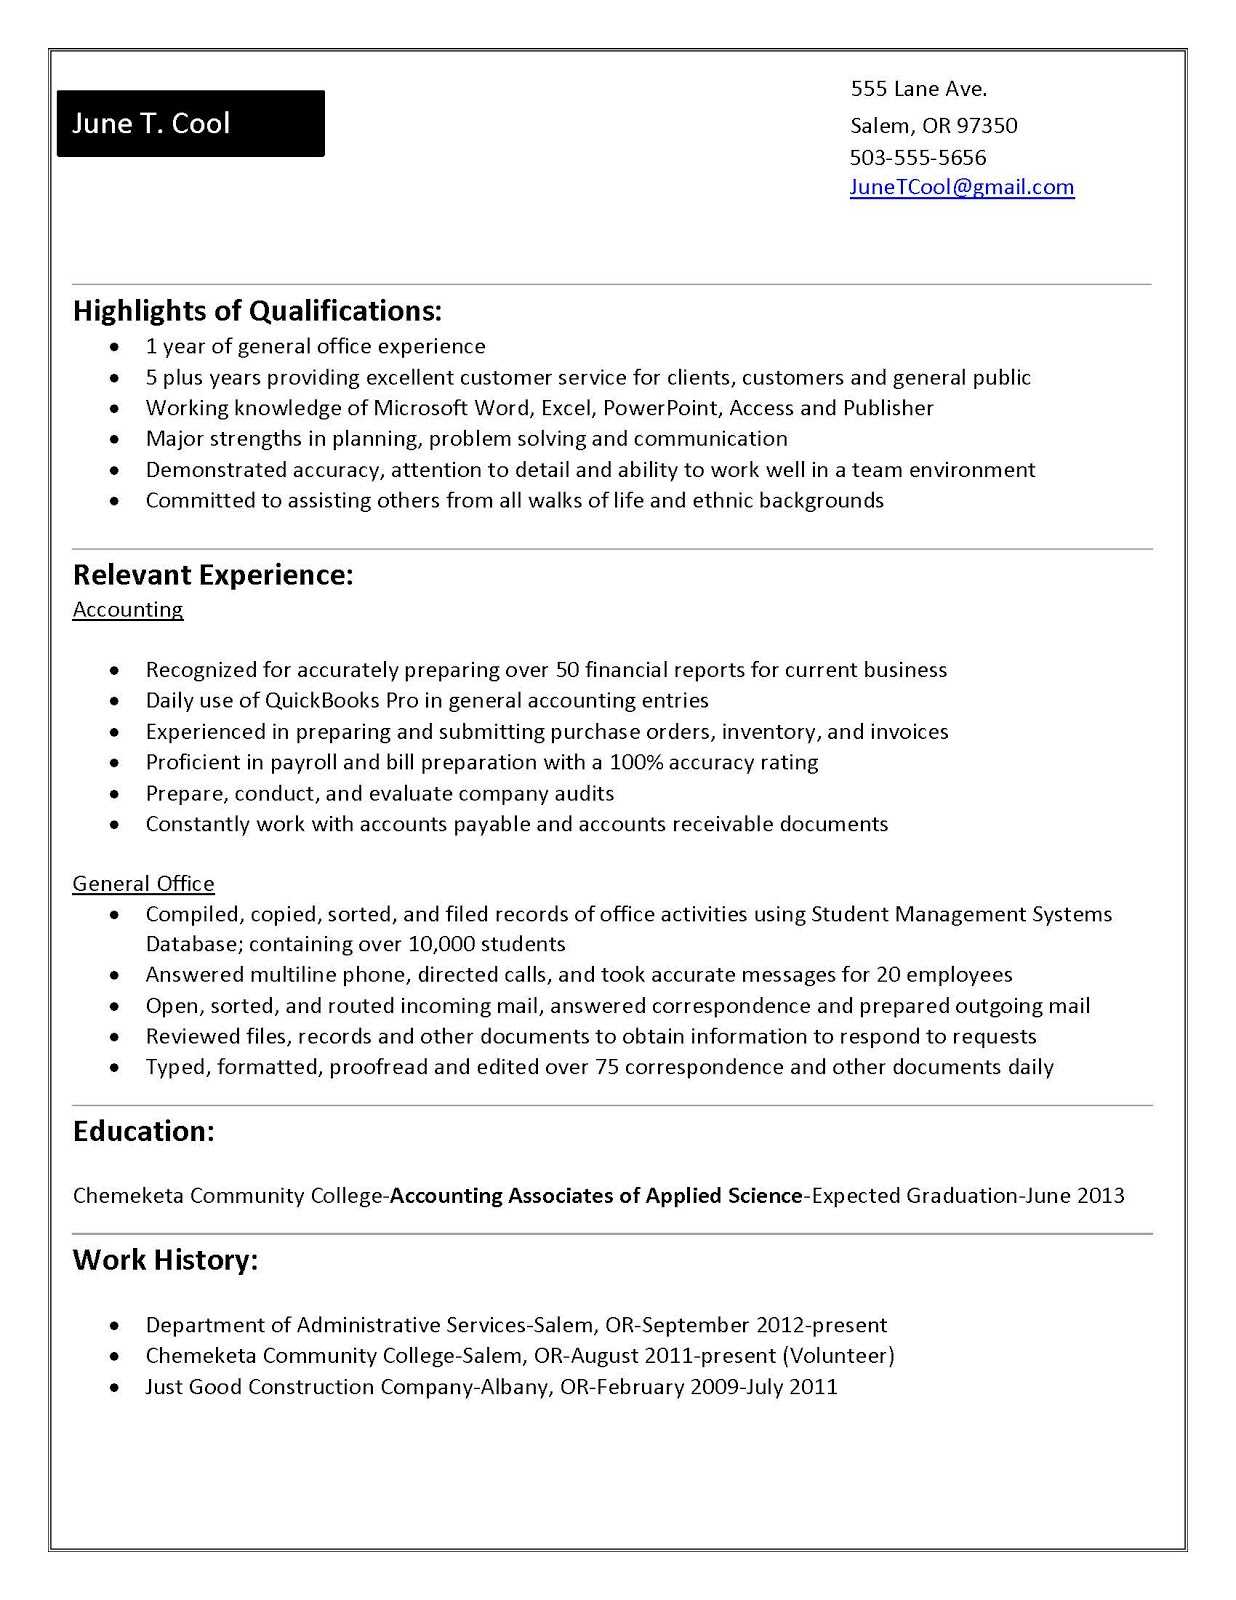 Accounting Functional Resume: College Student Resume For College Student Resume Template Microsoft Word